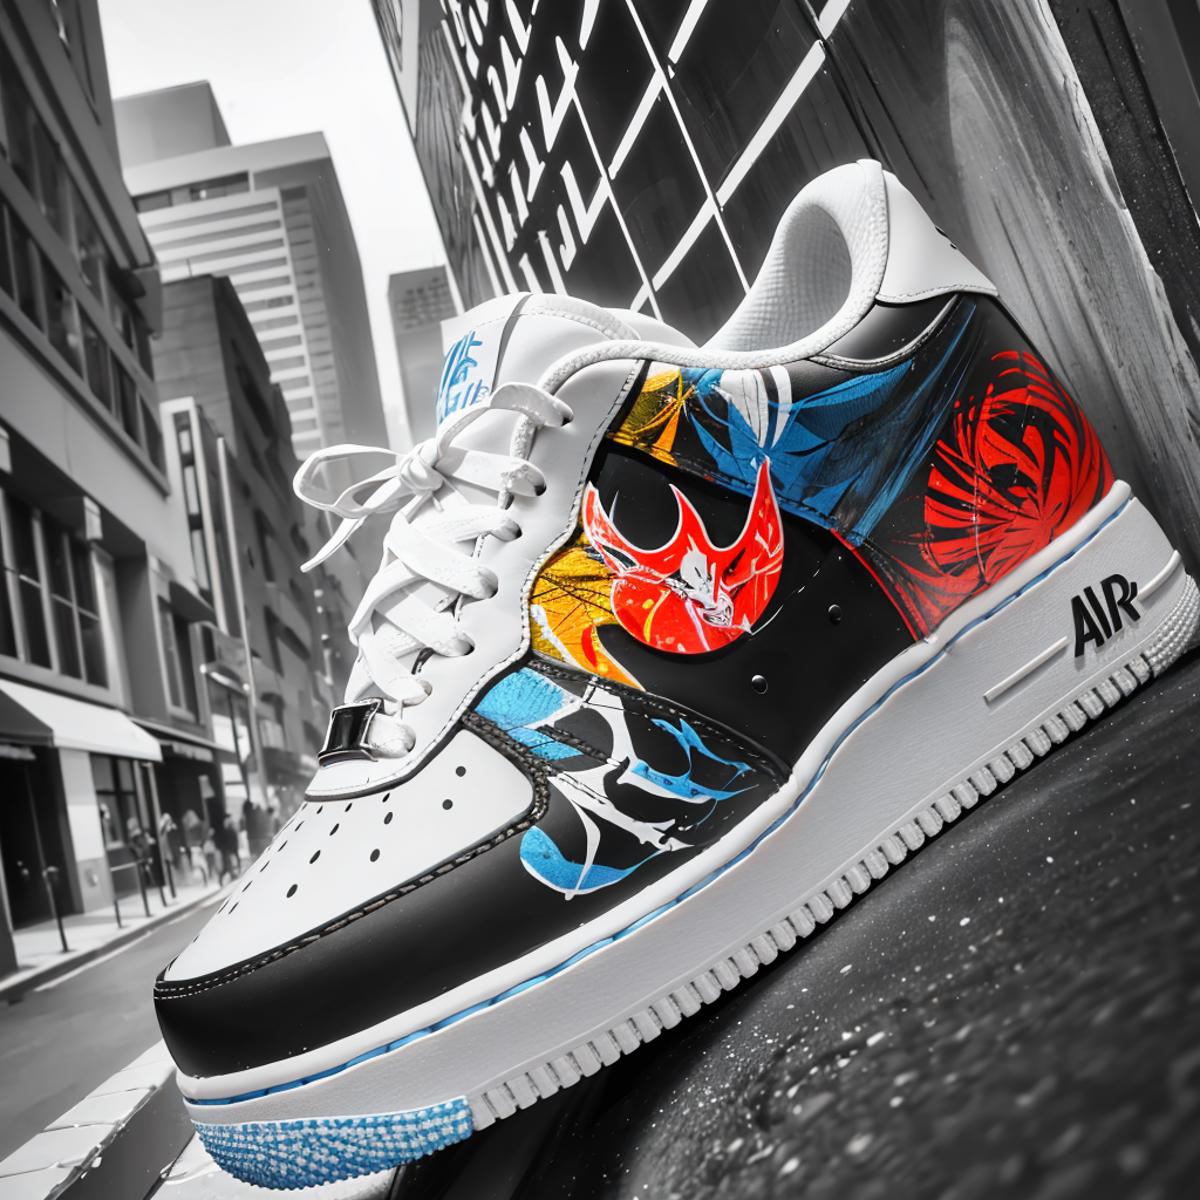 Nike Air Force 1 image by Lembont